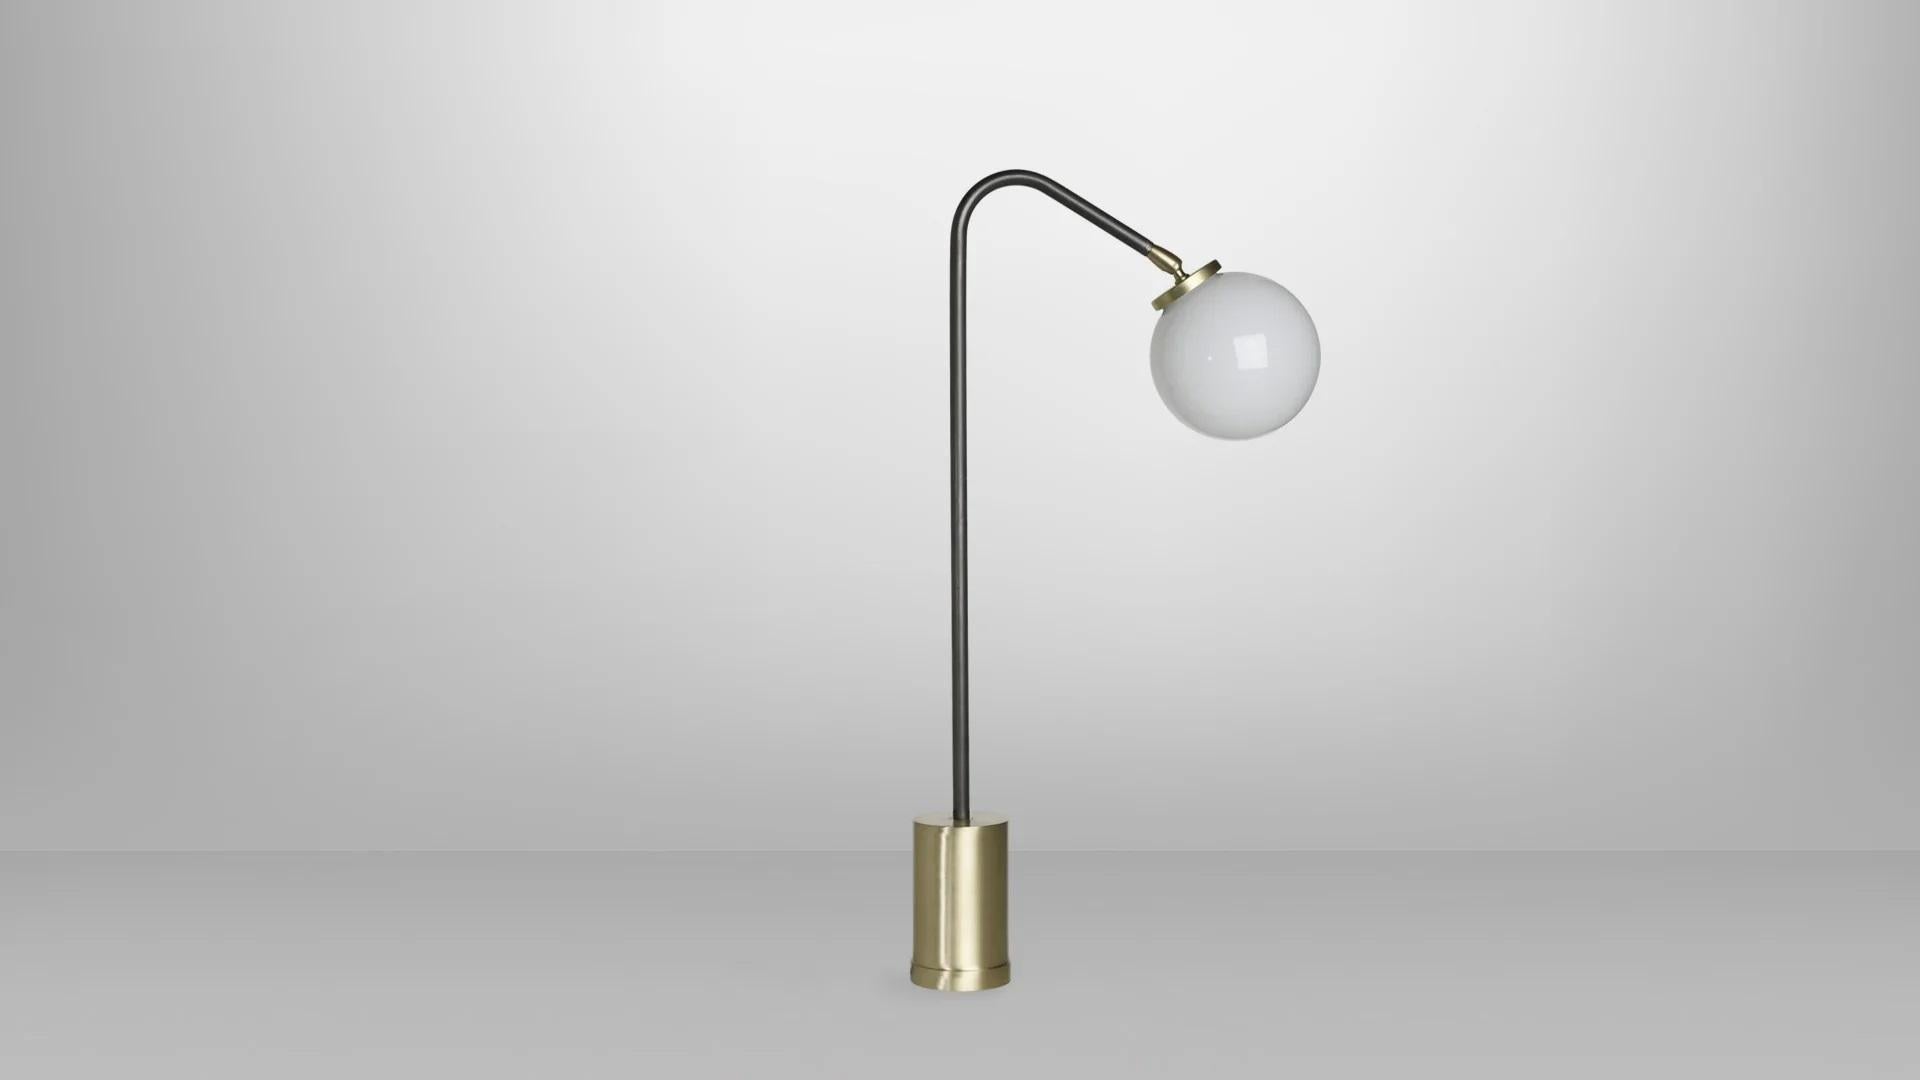 Array opal table lamp by CTO Lighting
Materials: bronze with satin brass base and opal glass shade.
Dimensions: W 12 x D 23 x H 60 cm 

All our lamps can be wired according to each country. If sold to the USA it will be wired for the USA for